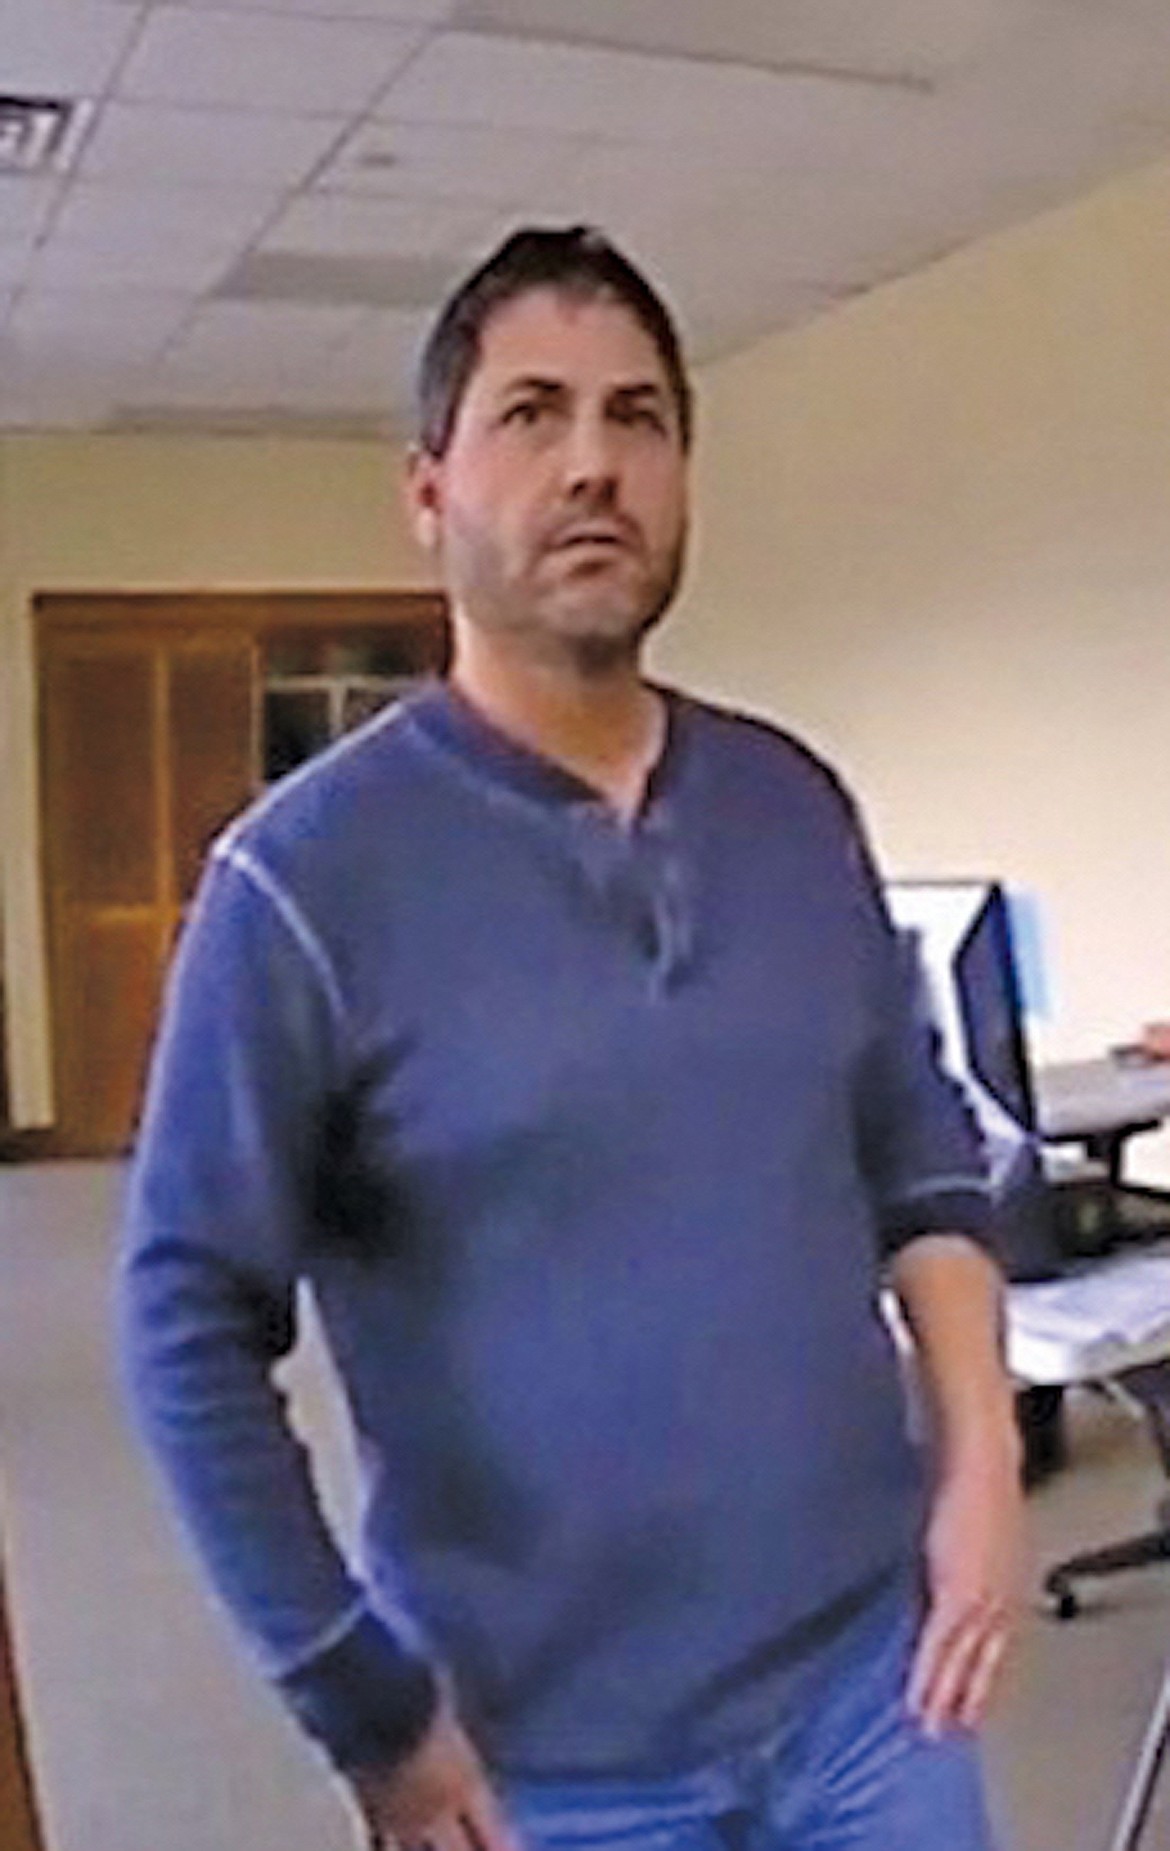 This Sandpoint Police Department body cam photo shows Scott D. Rhodes at the door of his Division Street publishing office in late-2017, as law enforcement officials confronted him about video footage that showed him placing anti-Semitic media on vehicles at Sandpoint High School.